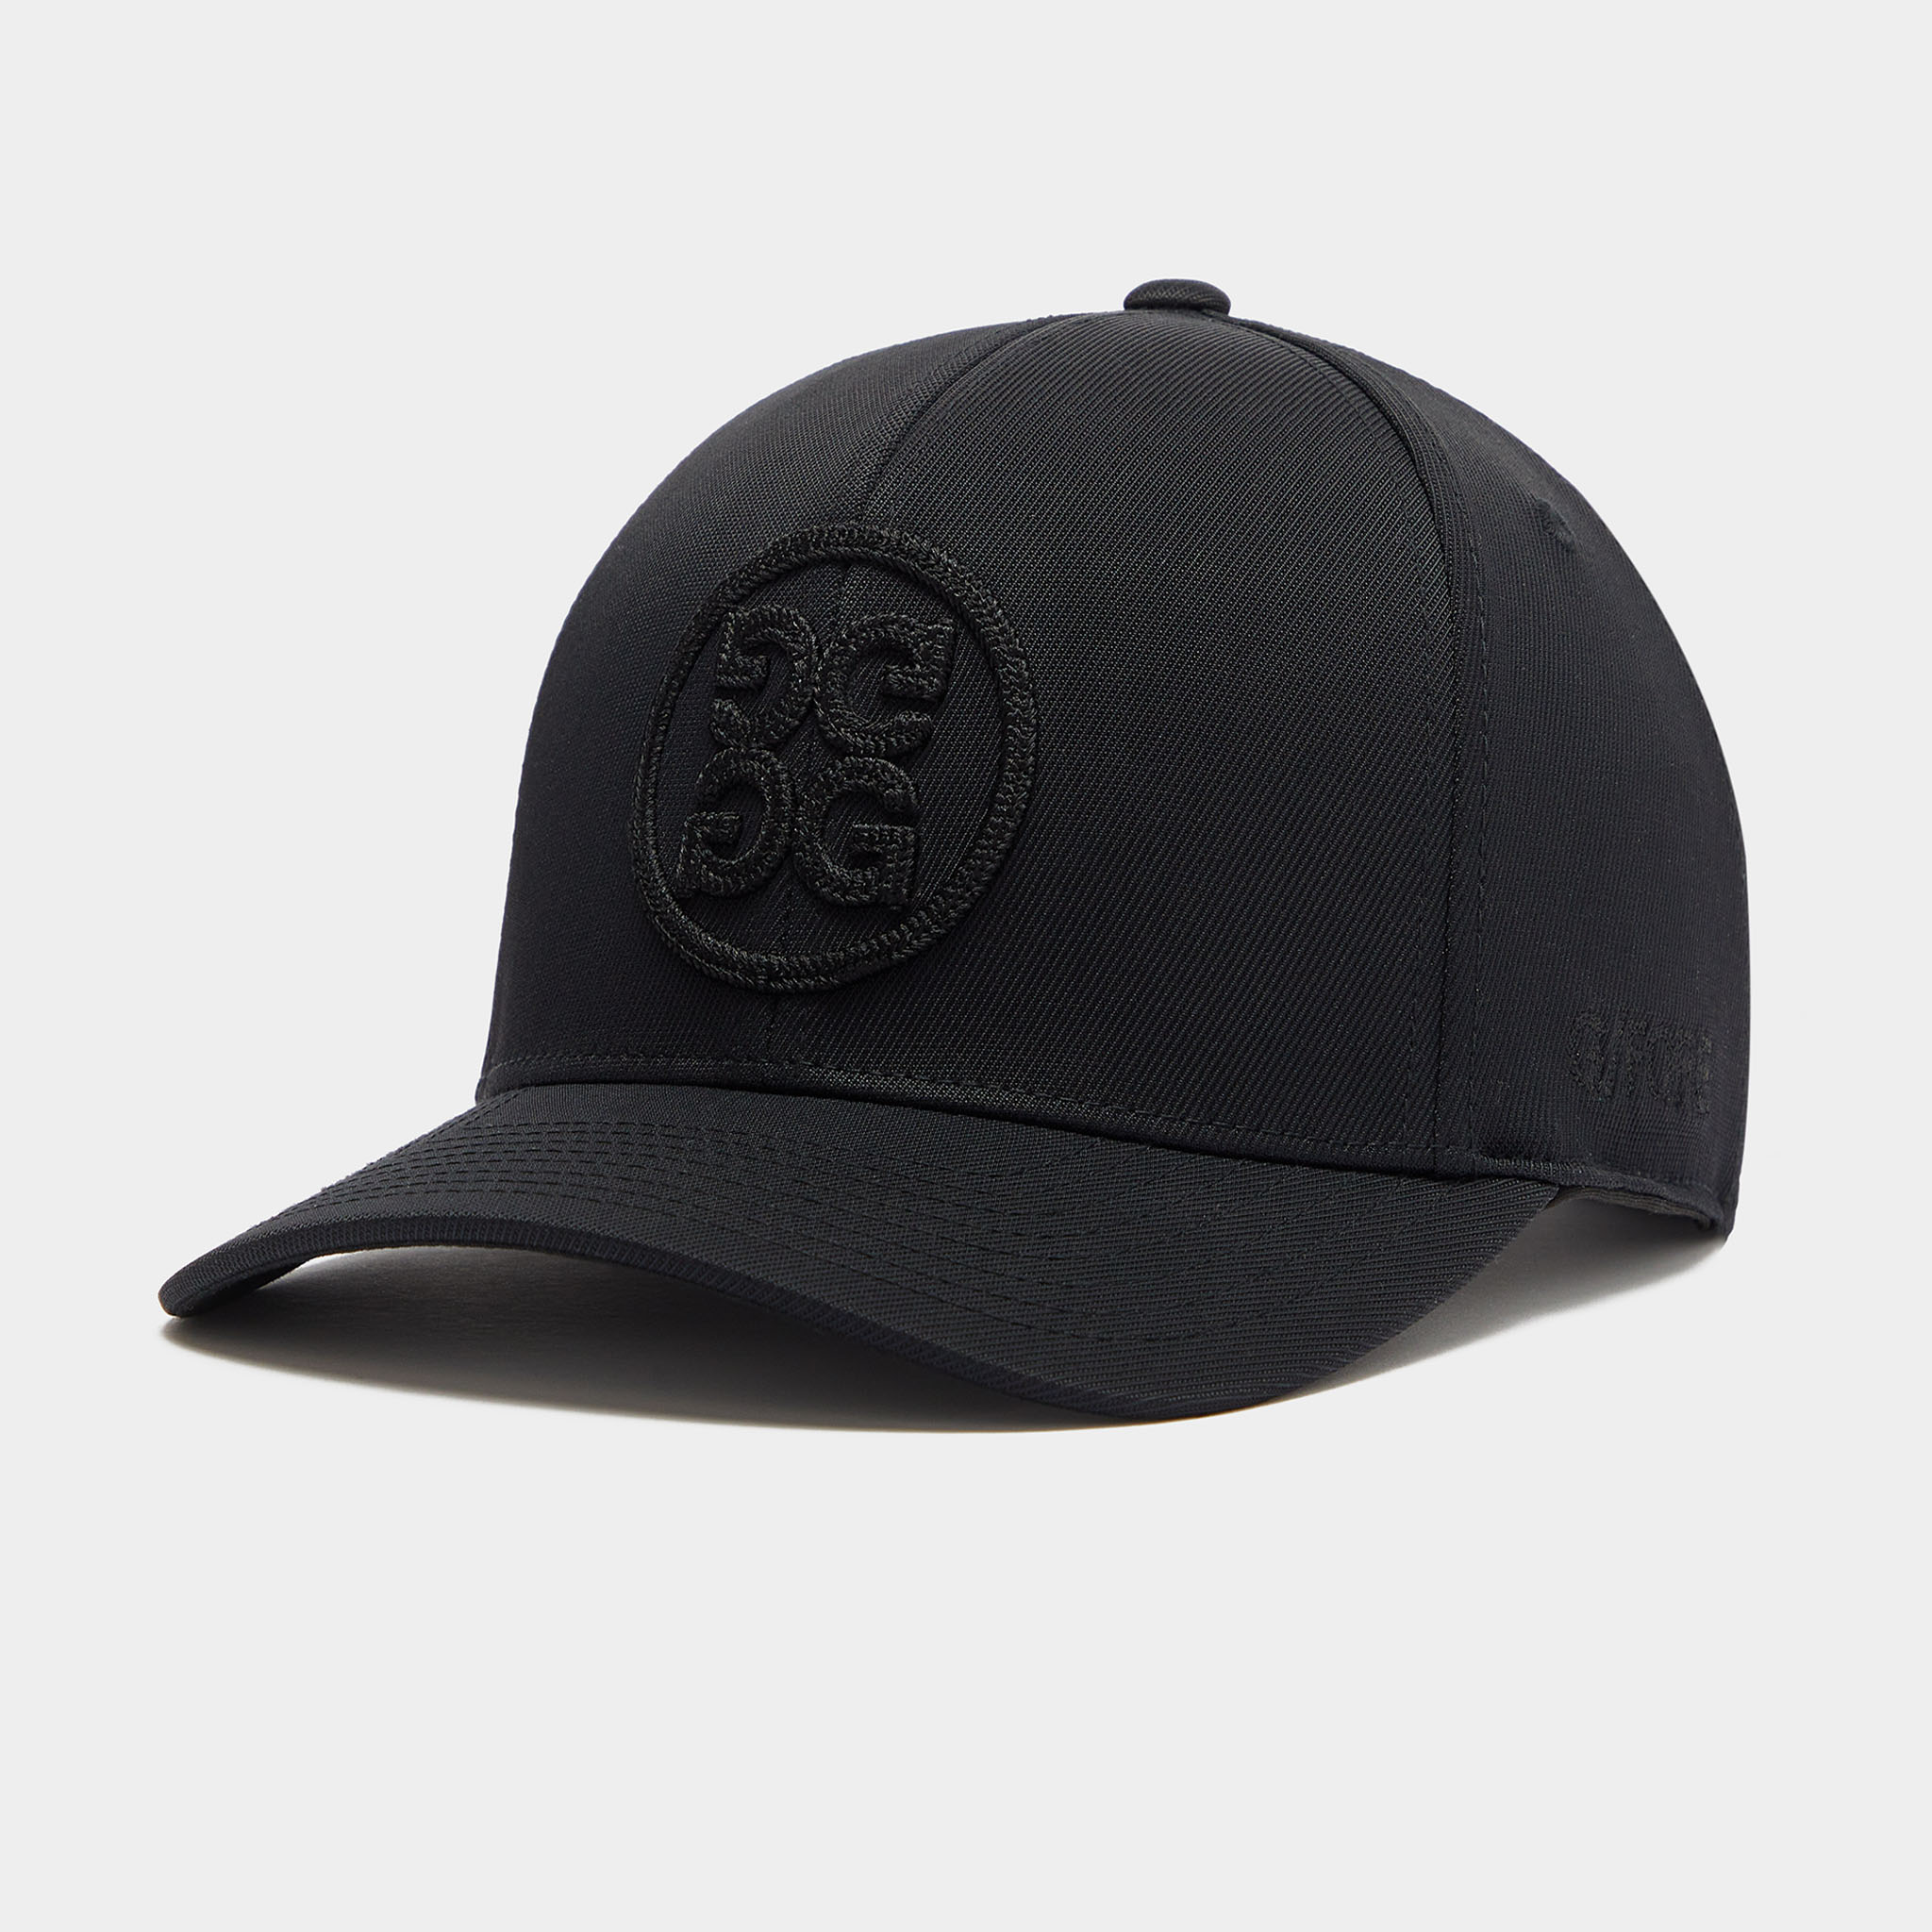 Stretch fit snapback cap - embroidered with your design in Whistler